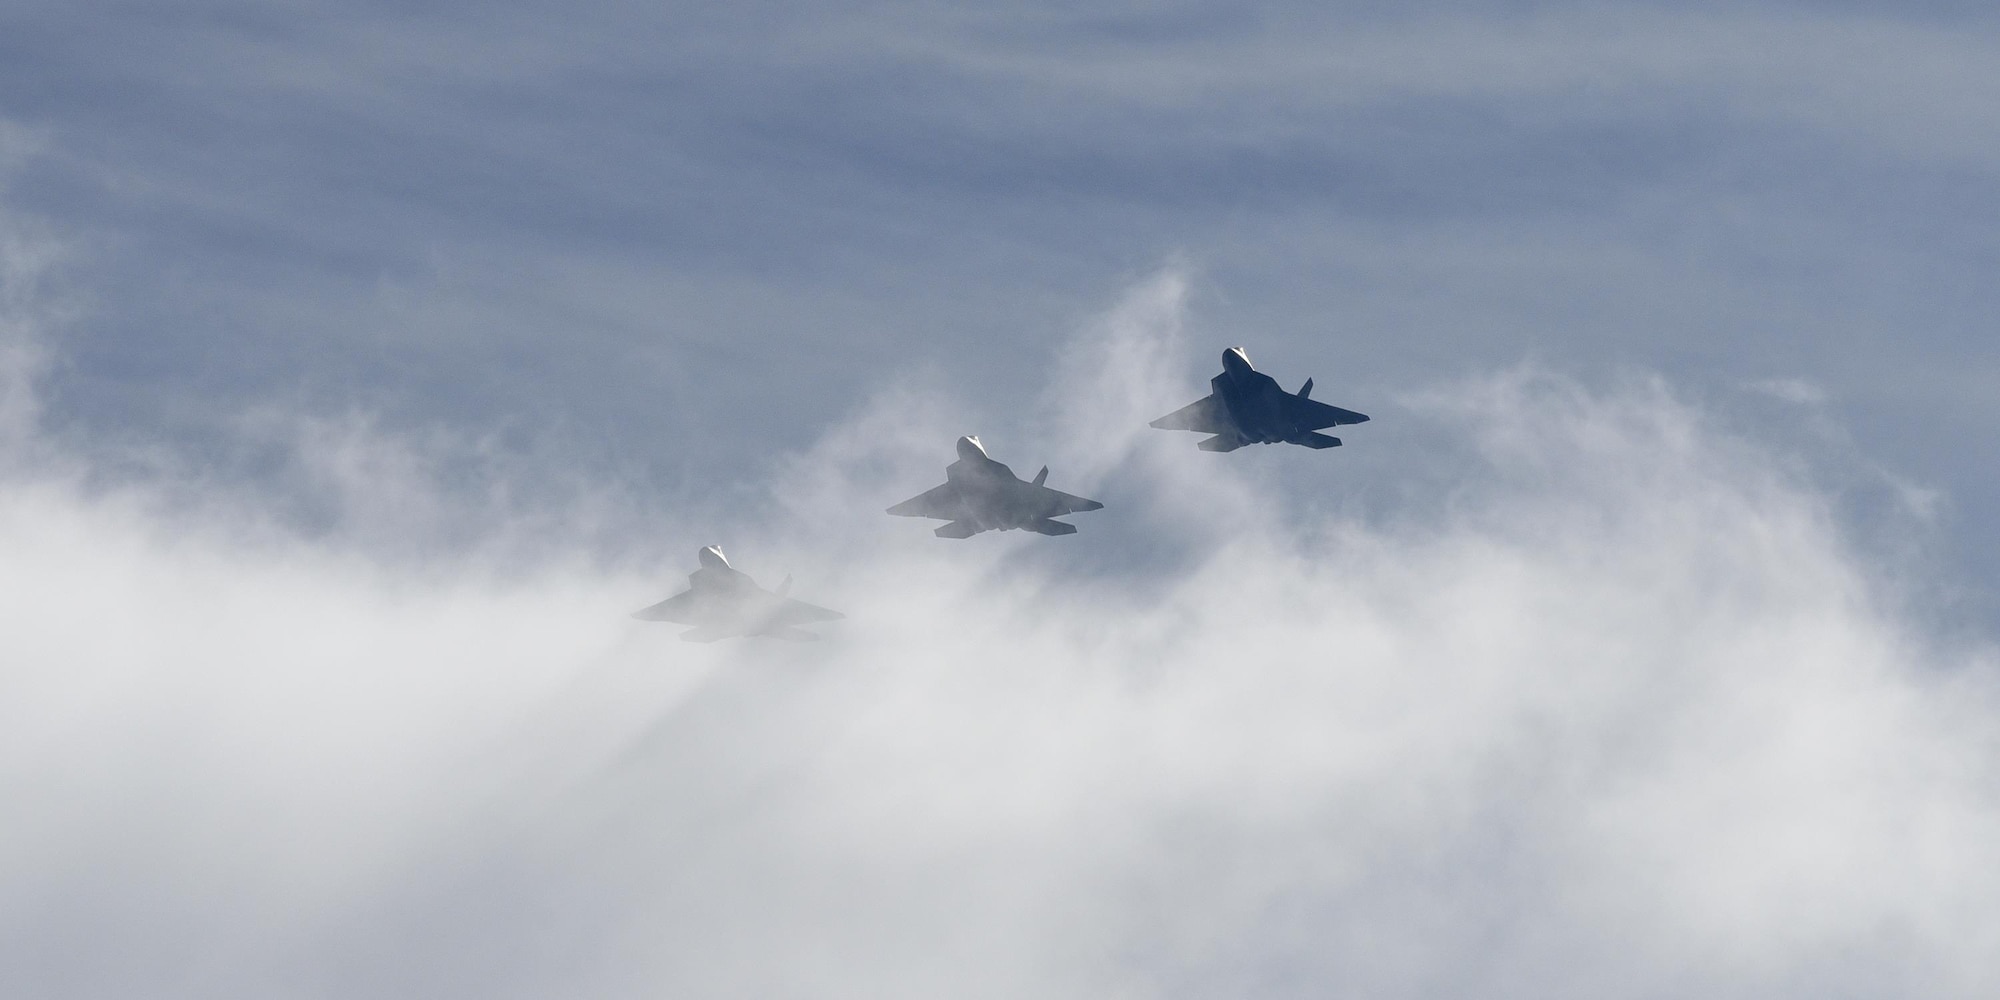 Three U.S. Air Force F-22 Raptors from Tyndall Air Force Base, Fla., fly in formation during Checkered Flag 17-1, Dec. 8, 2016. The integration training pilots receive during exercises like Checkered Flag ensure they can seamlessly work together in a real-world combat situation. (U.S. Air Force photo by Staff Sgt. Alex Fox Echols III/Released)